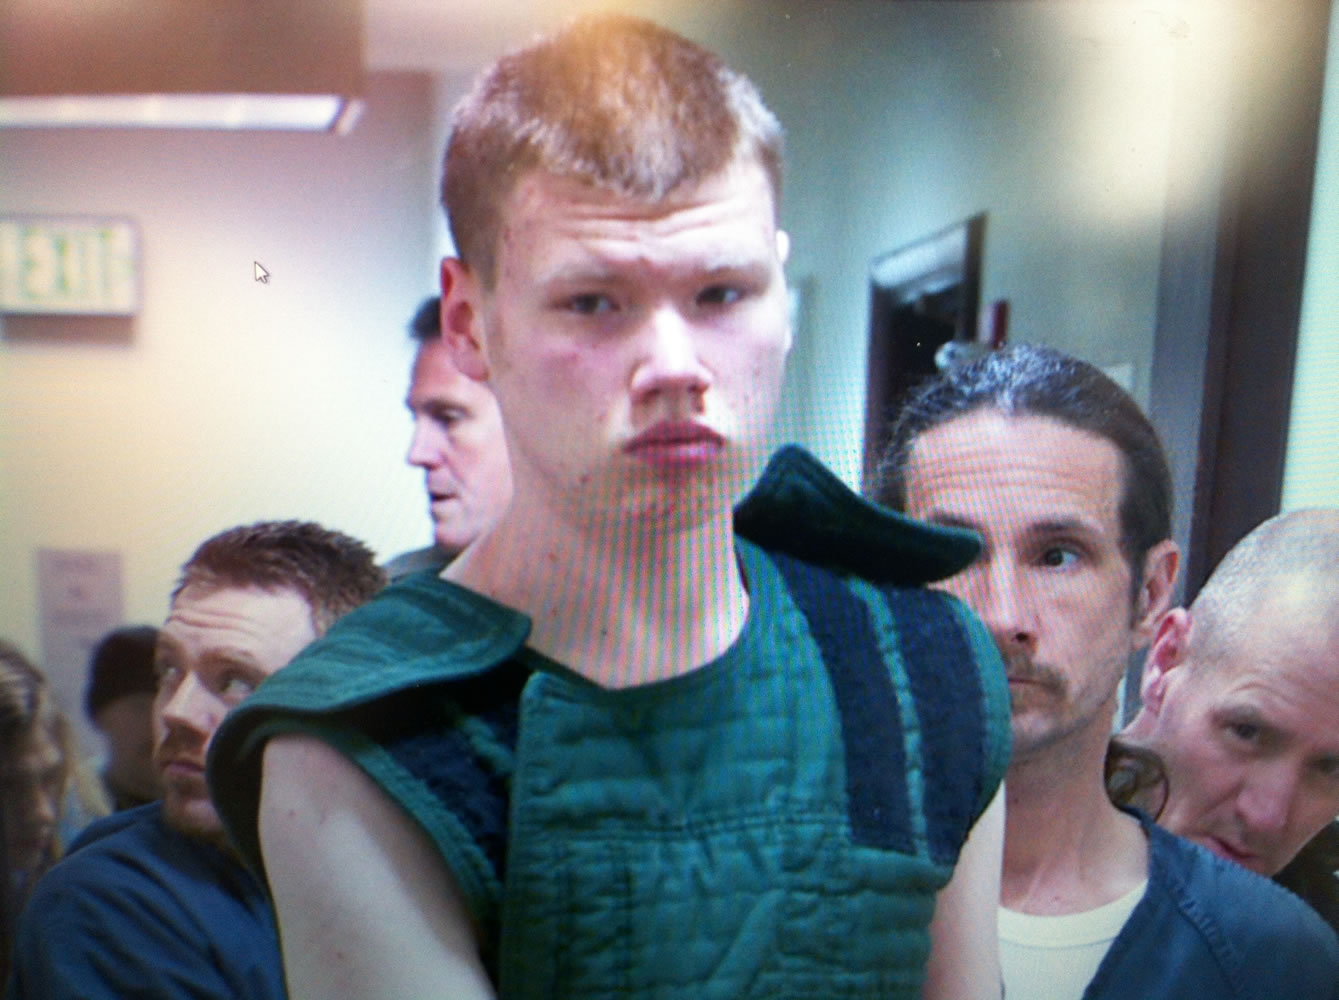 Luke Michael Love, 18, appears in Clark County Superior Court March 21, 2013 on suspicion of threat to bomb Battle Ground High School
Courtesy of KATU